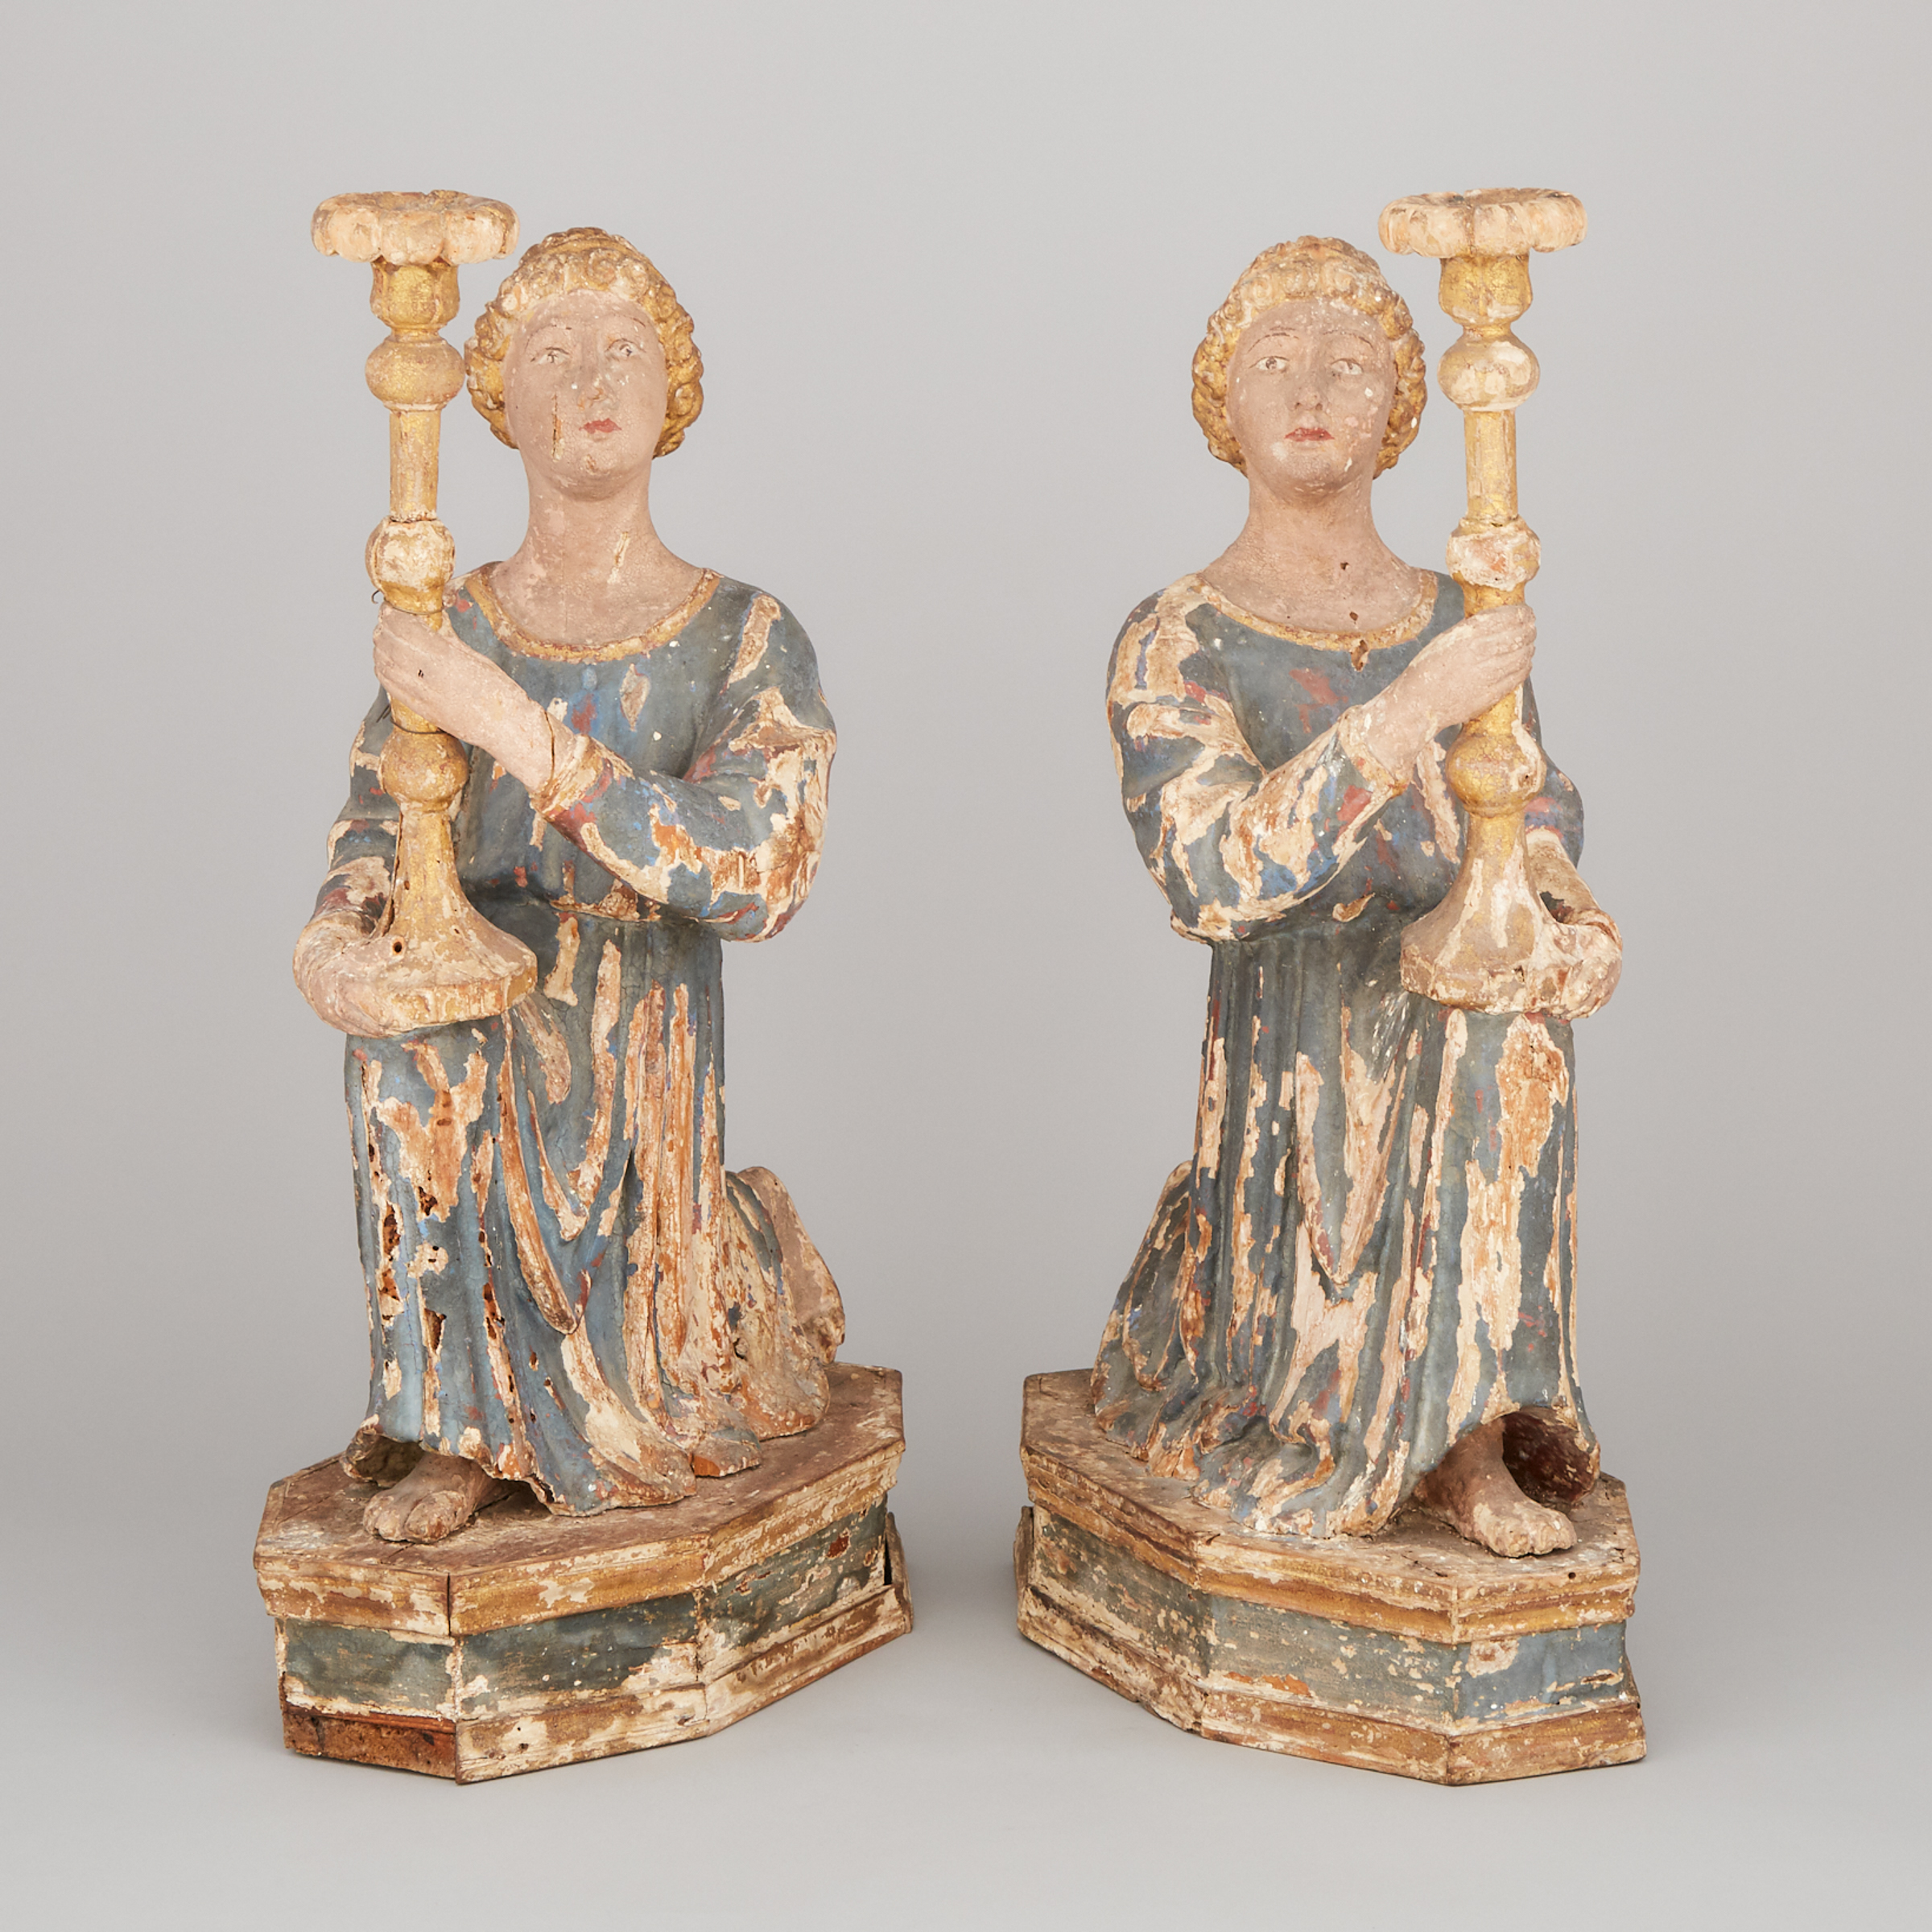 Pair of North Italian Carved and Polychromed Wood Figural Altar Torchères, mid 18th century